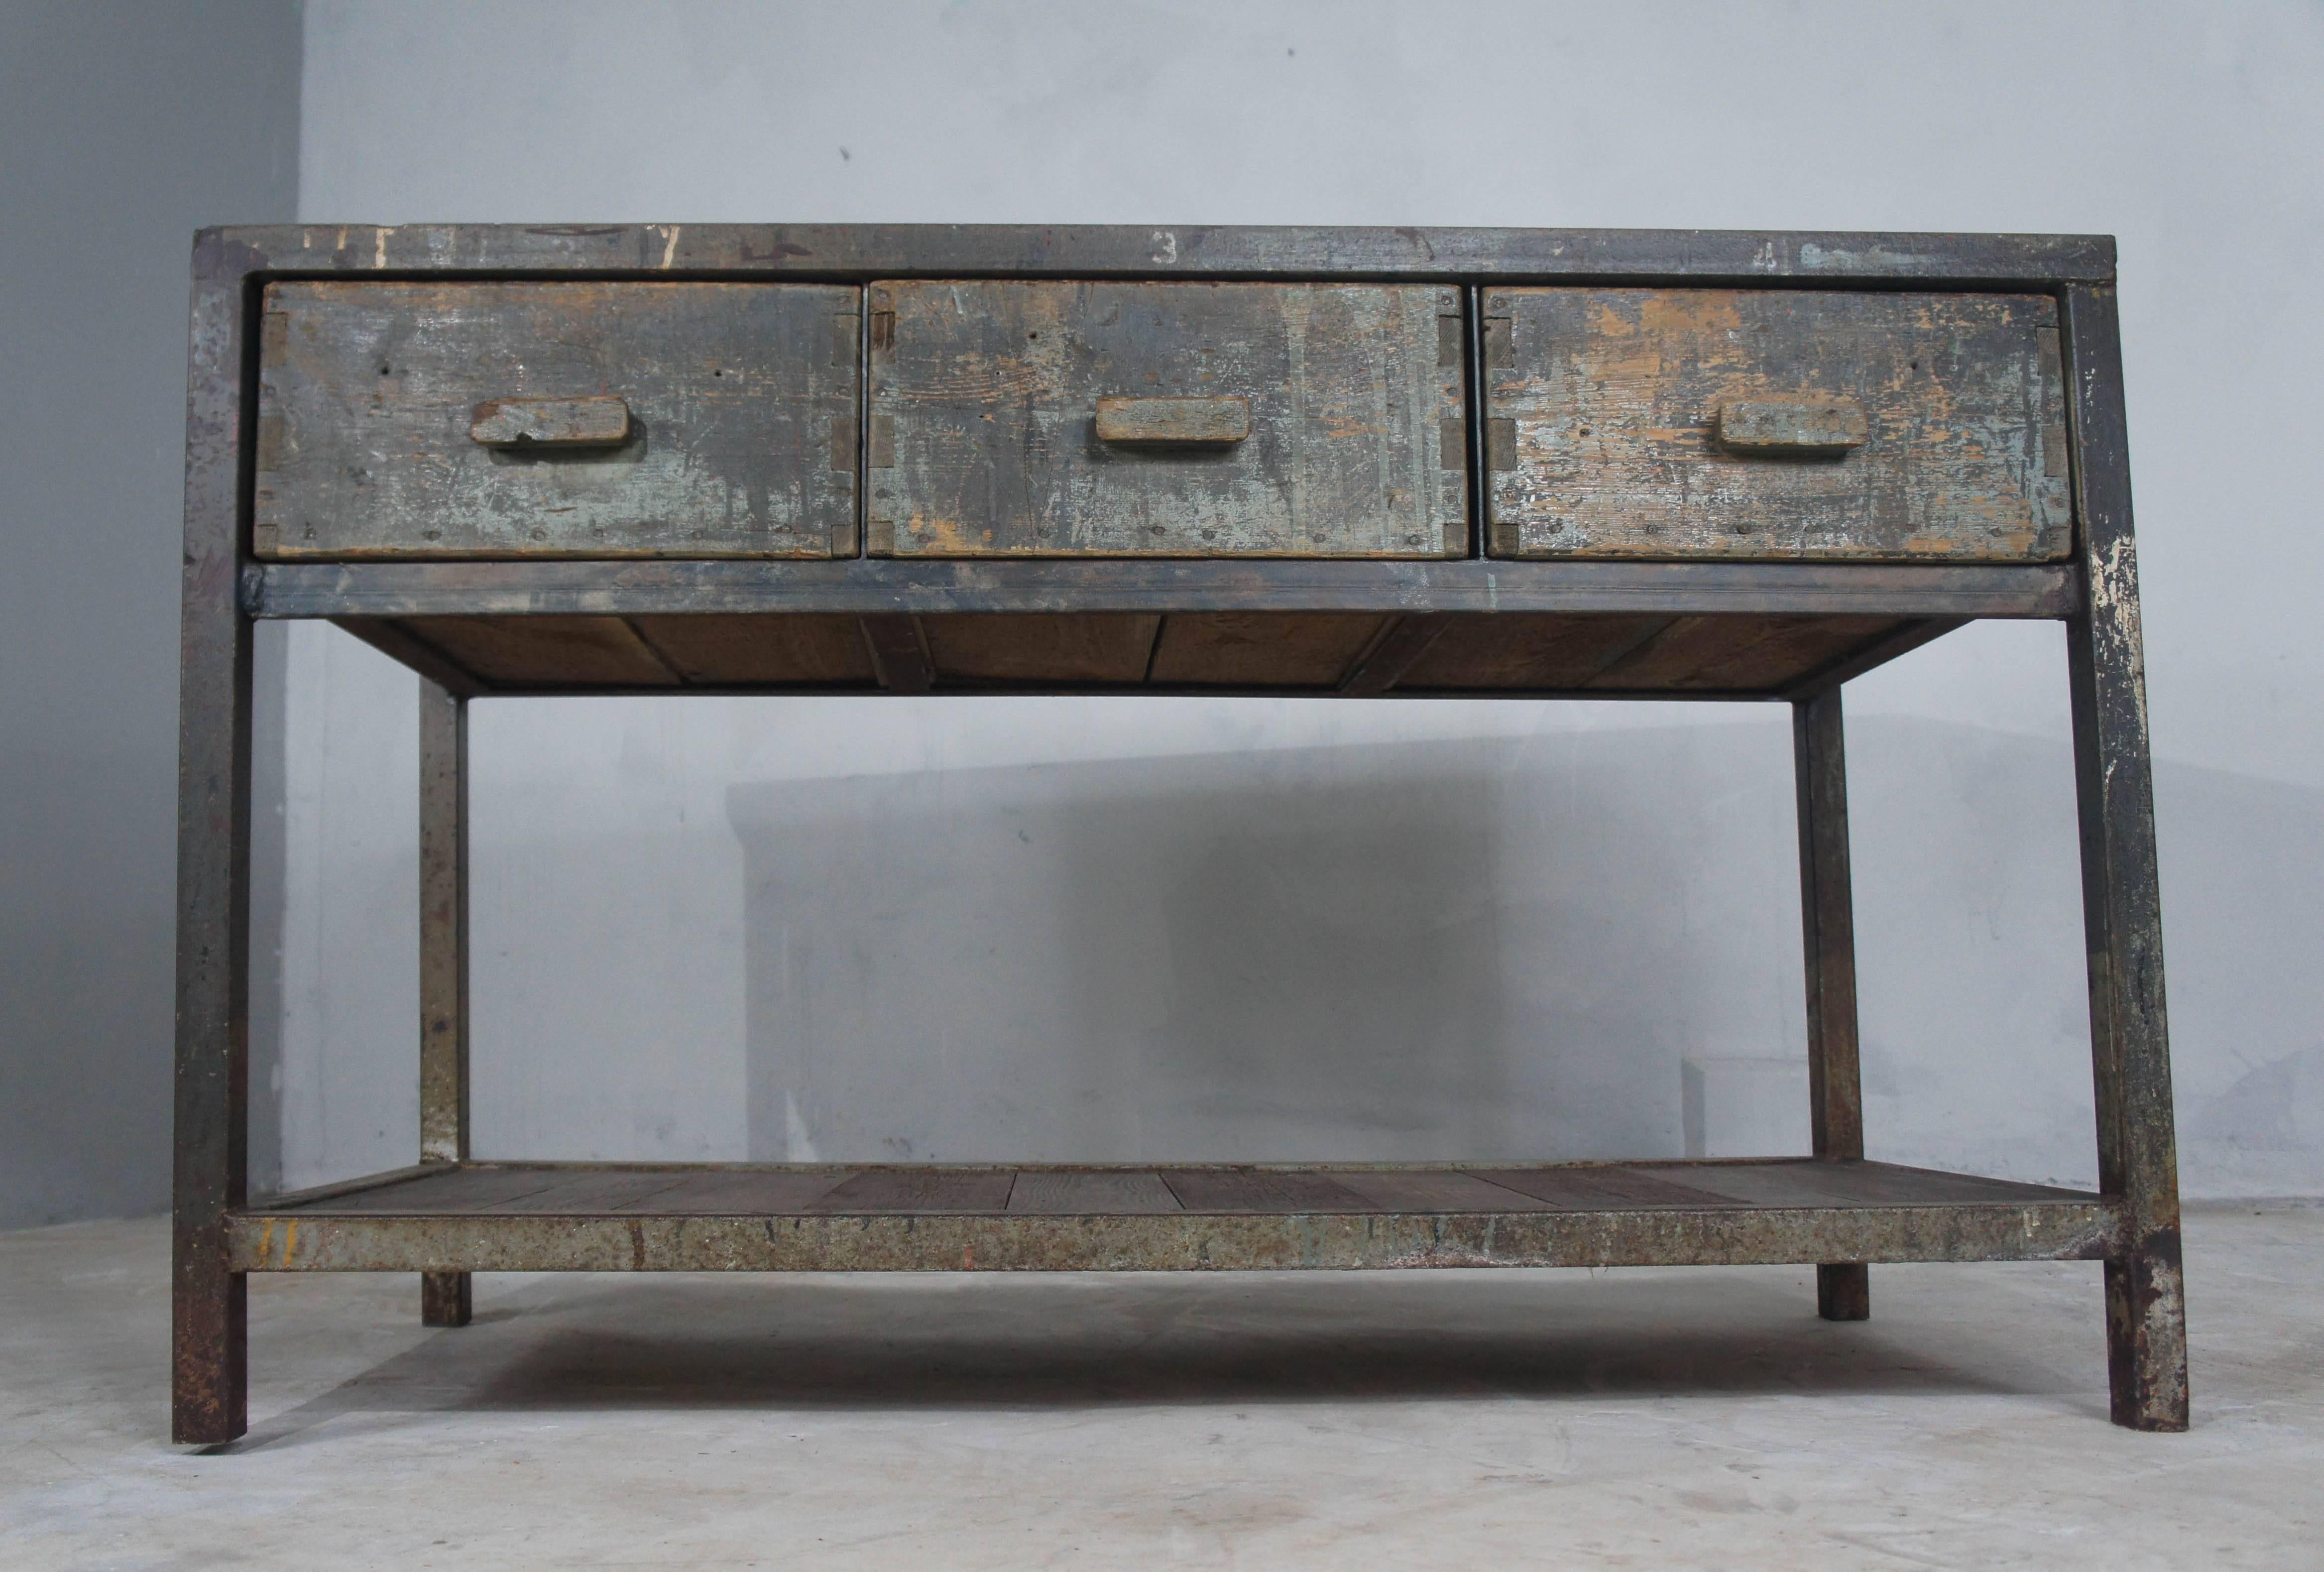 This three drawer steel framed workbench has been repurposed to make a fantastic industrial kitchen island. We have added a dark grey cement resin top which complements the existing frame and style of the piece. The concrete looking top overhangs